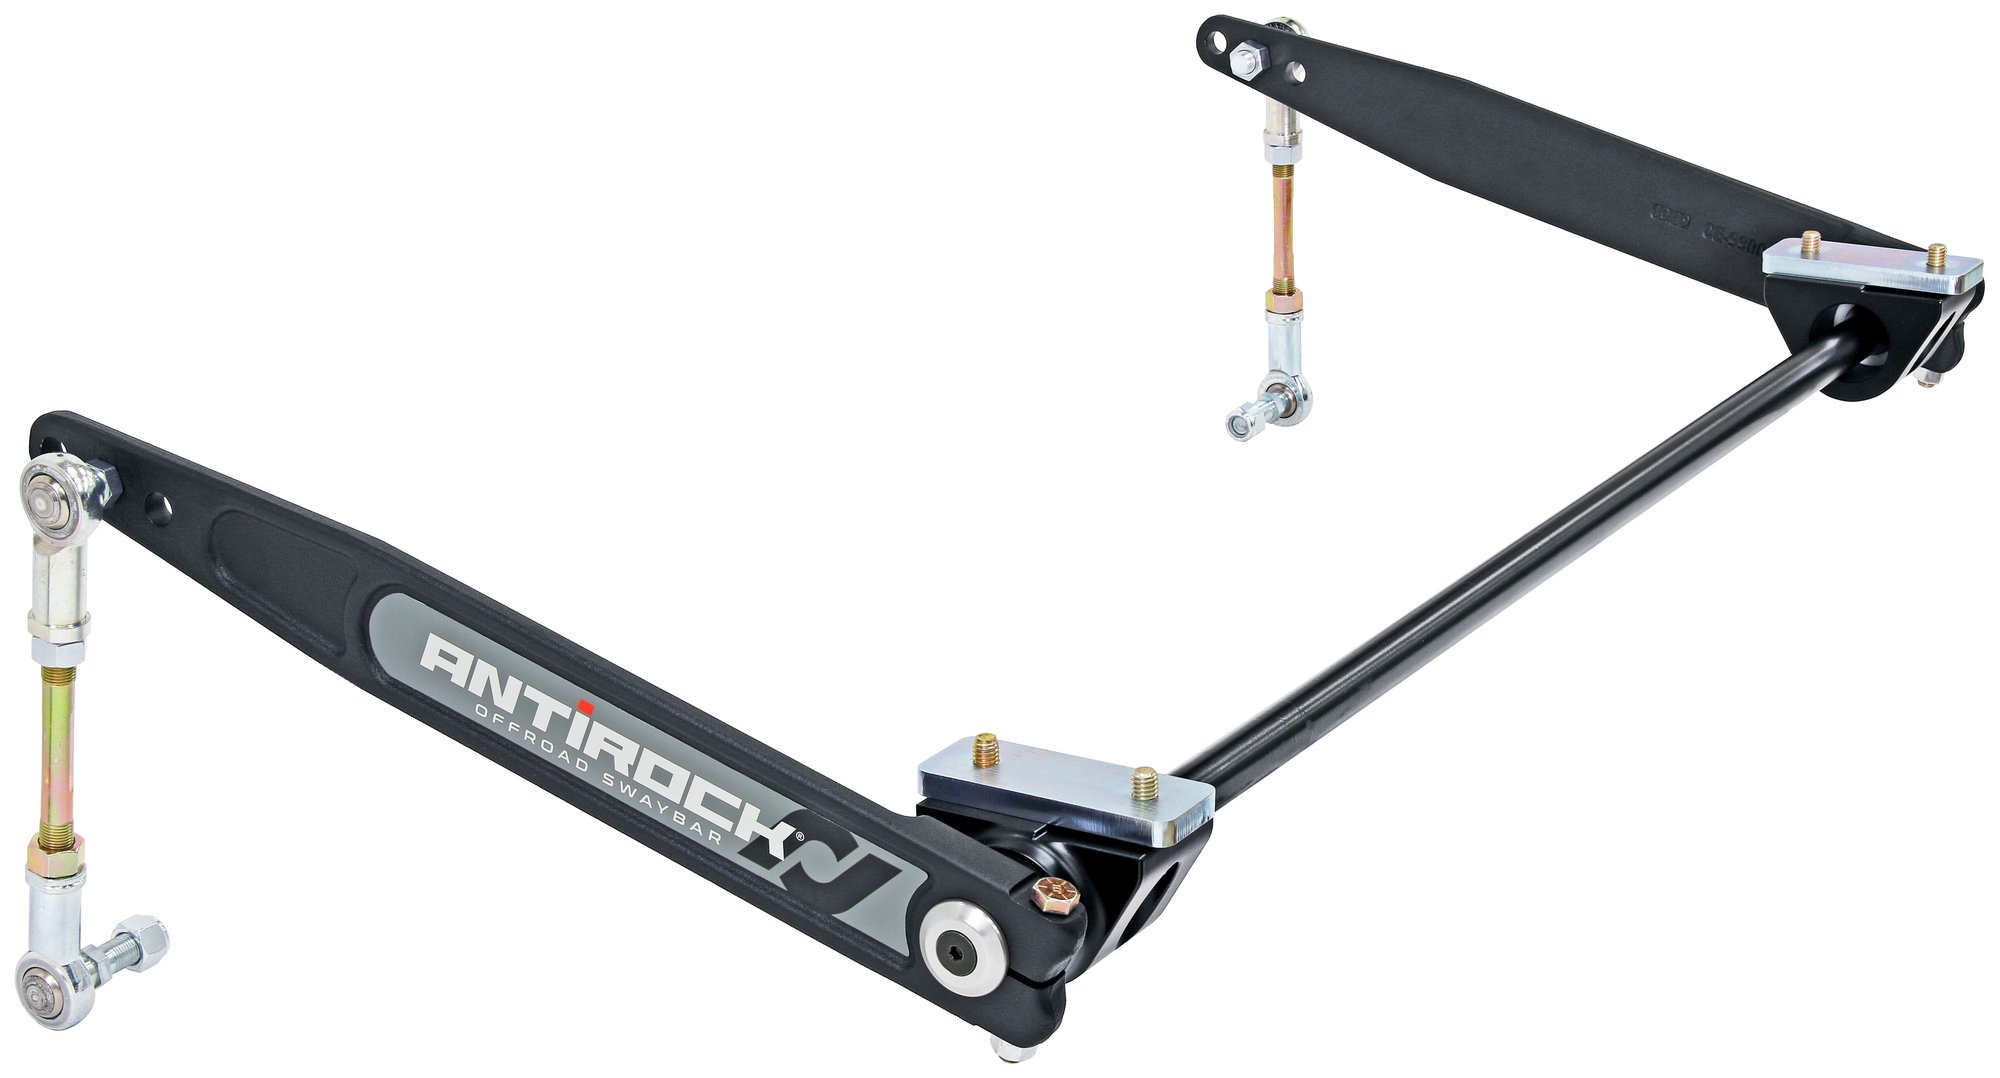 RockJock CE-9900XJF Antirock Front Sway Bar Kit with Forged Arms for 87-01  Jeep Cherokee XJ and Comanche MJ